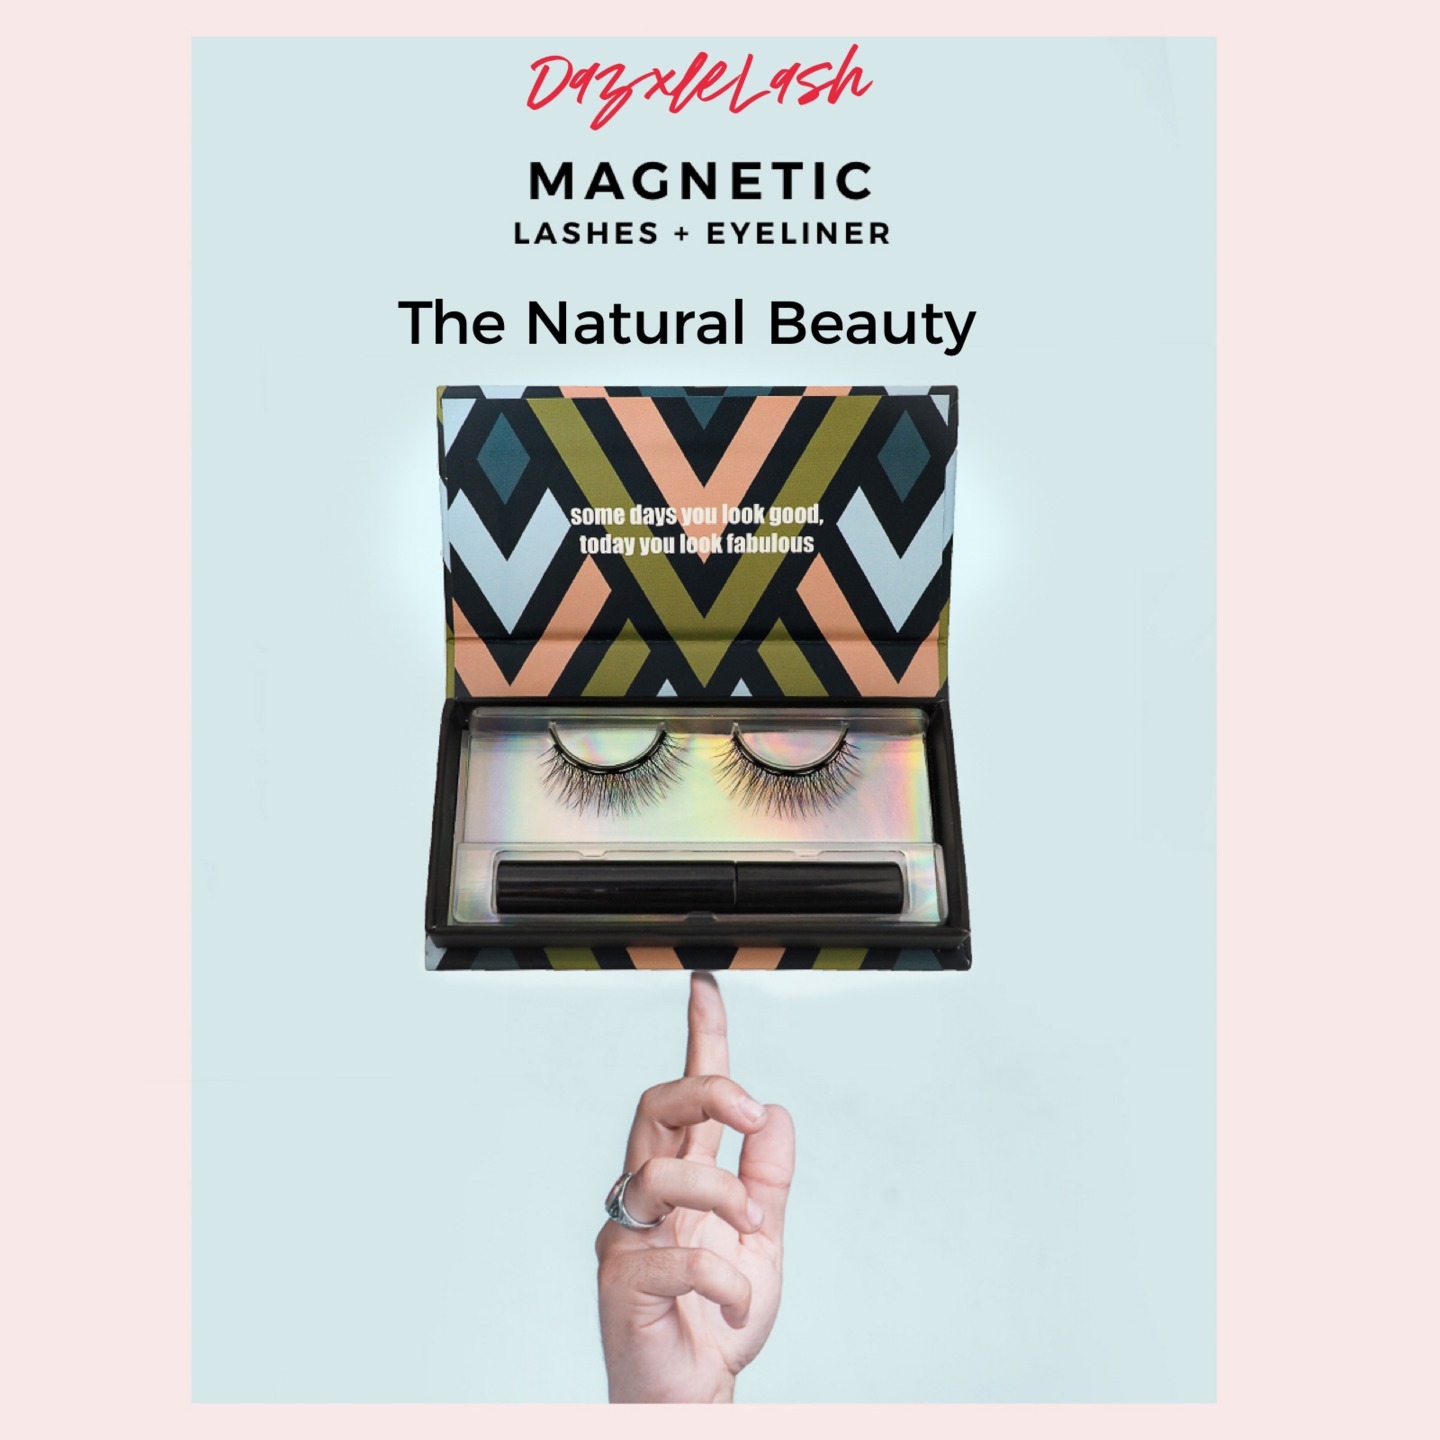 The Natural Beauty- Magnetic Lashes